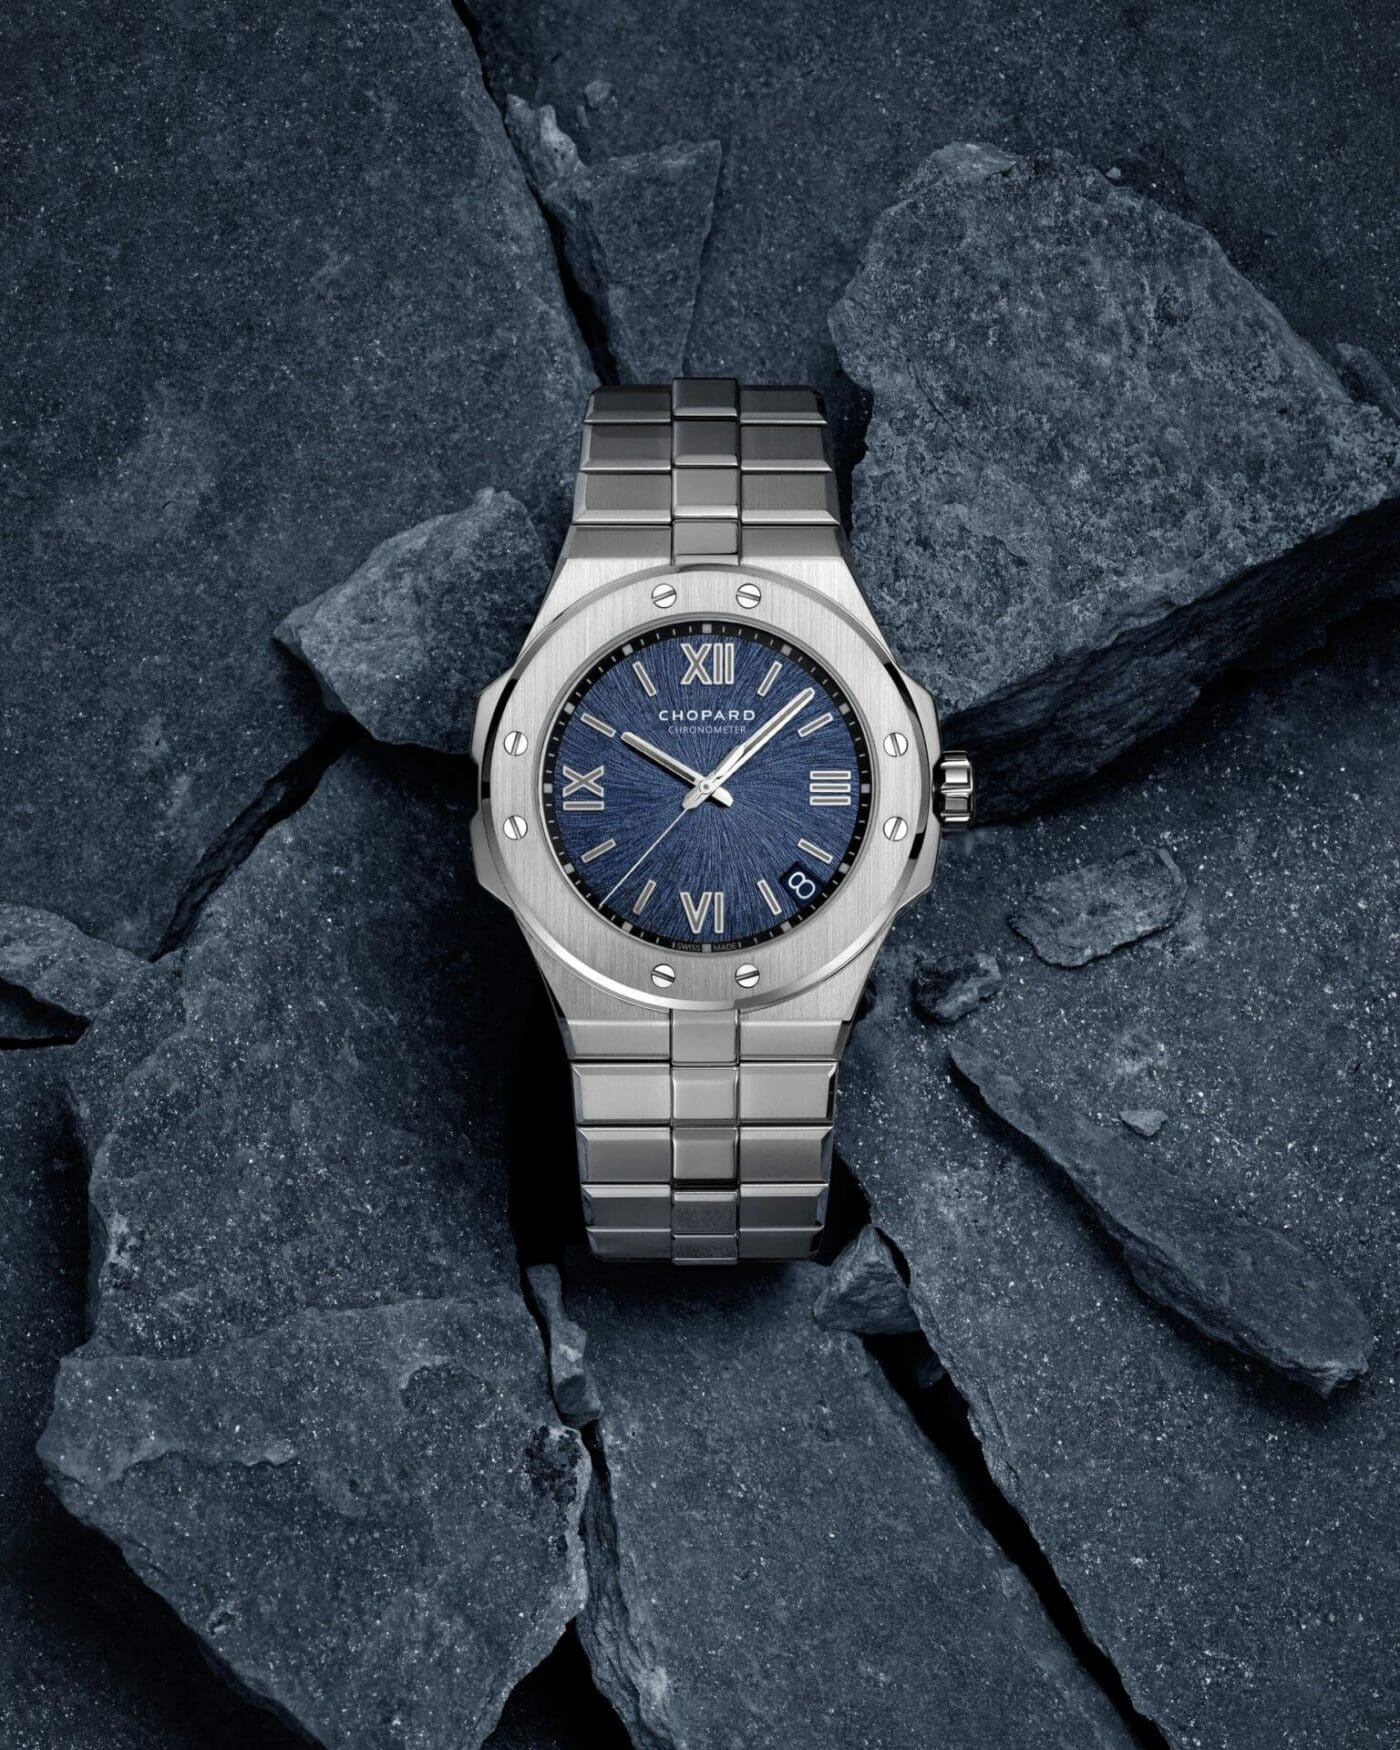 INTRODUCING: The Chopard Alpine Eagle, a new contender in luxury steel sports